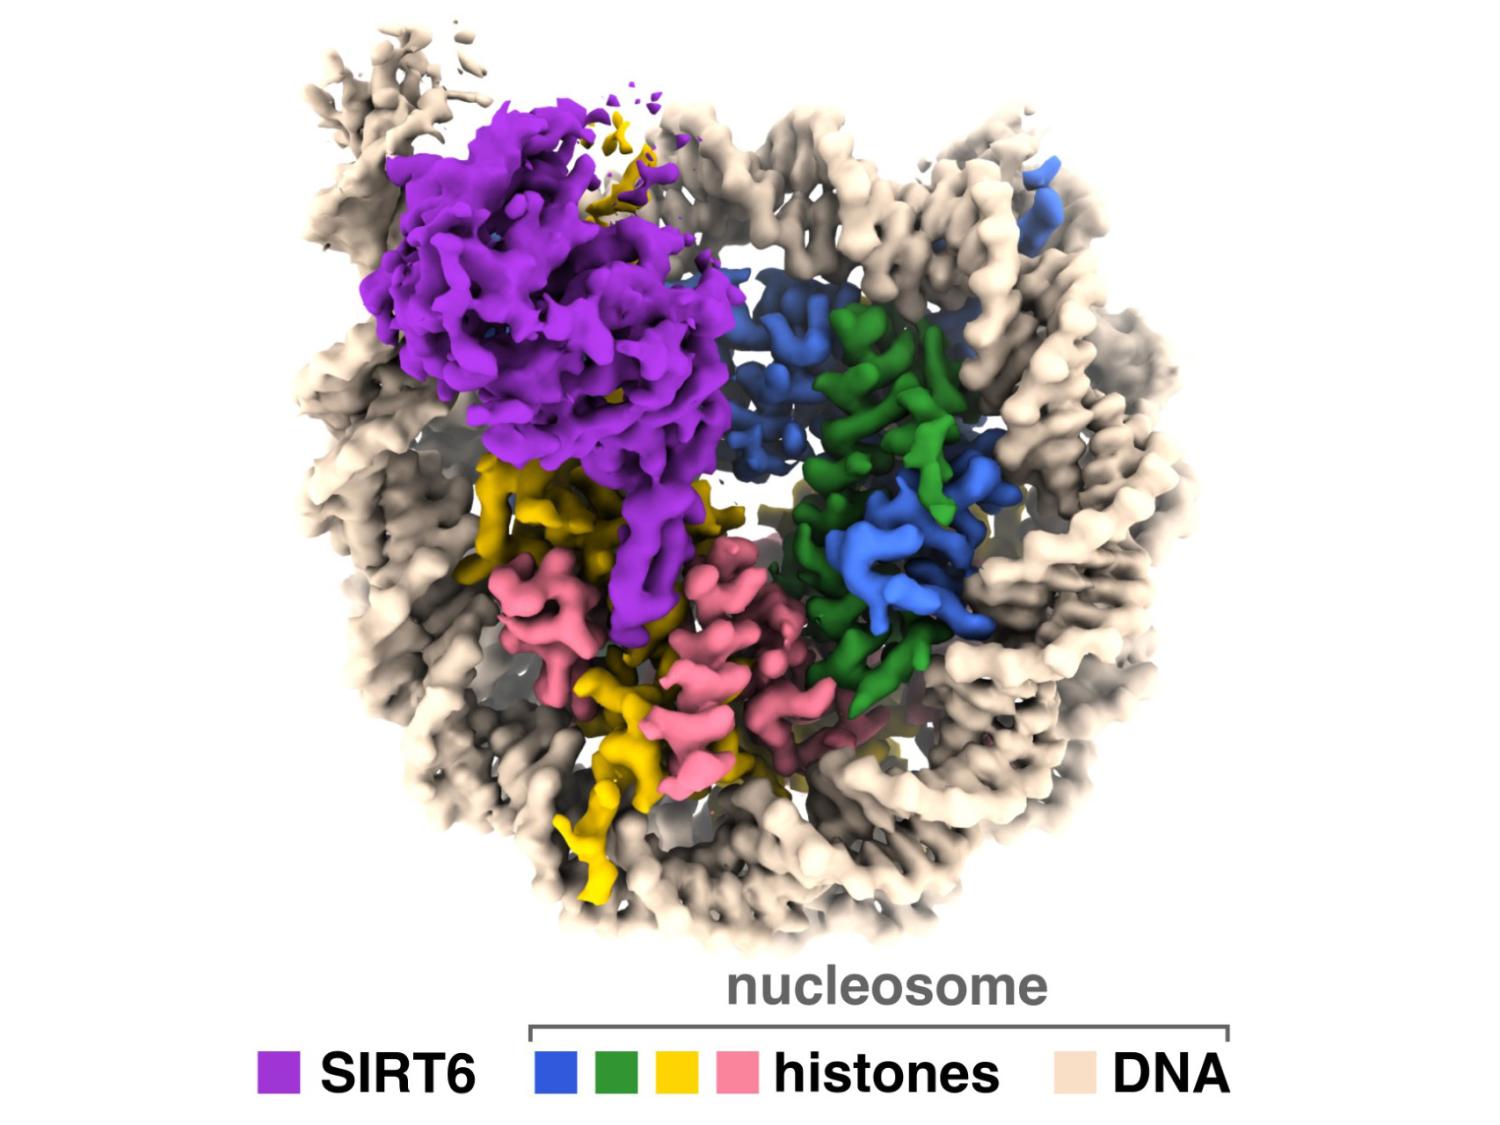 cryo-EM image of the SIRT6 enzyme in complex with the nucleosome